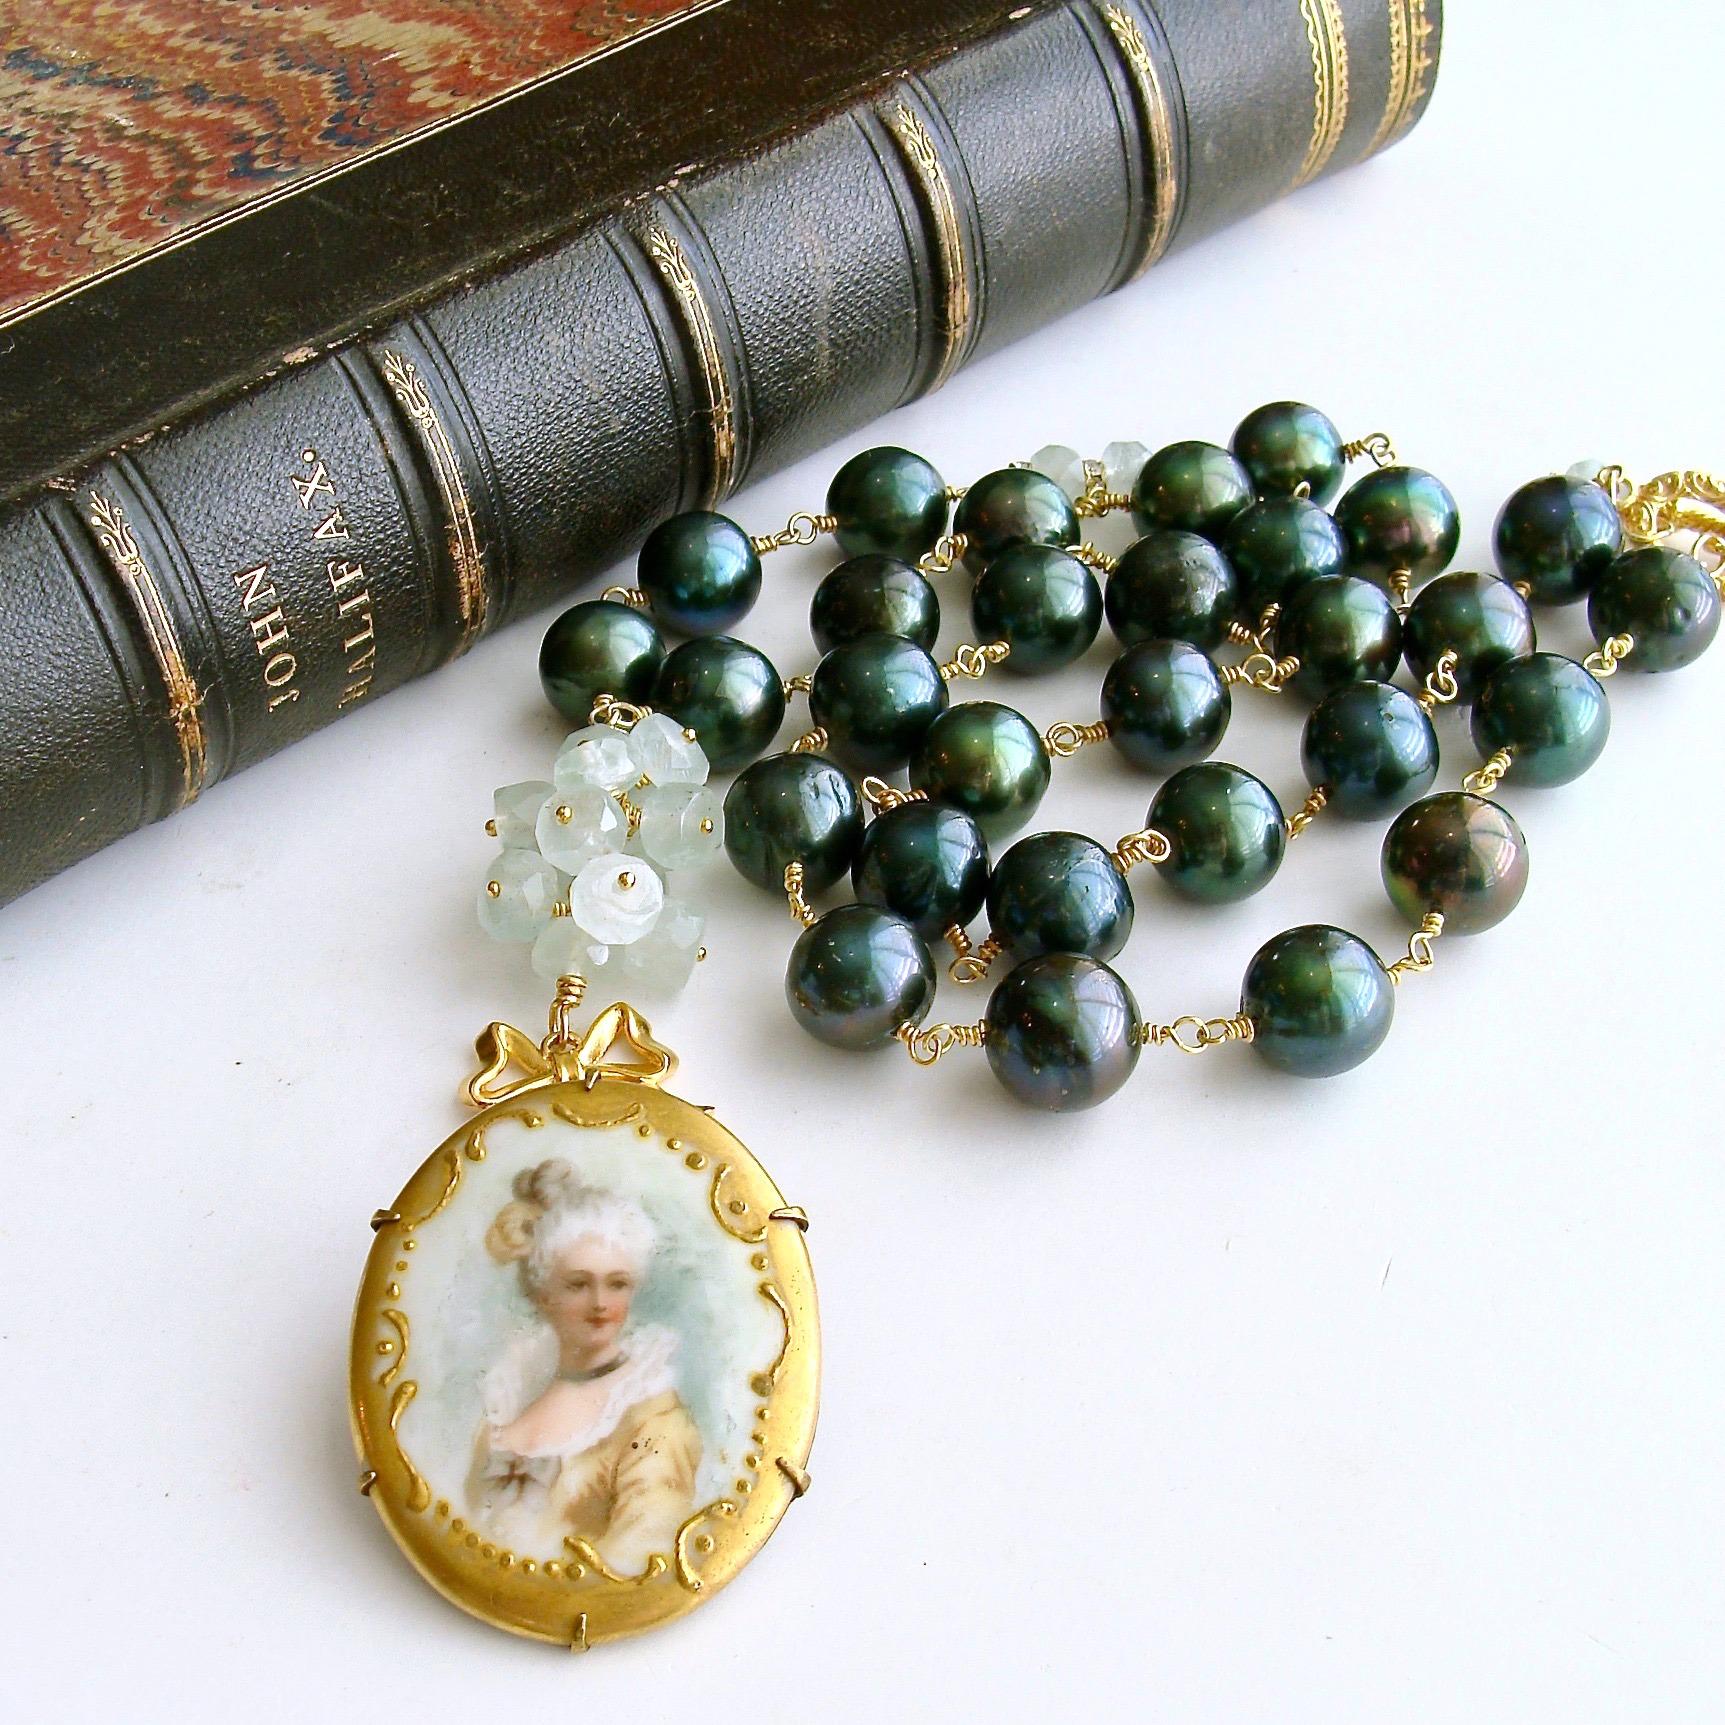 Marie’s Folly Necklace.

A beautiful hand painted porcelain brooch has become the focal point of this stunning necklace consisting of hand linked evergreen baroque pearls that gently accentuate the colors found in the hand painted portrait of this